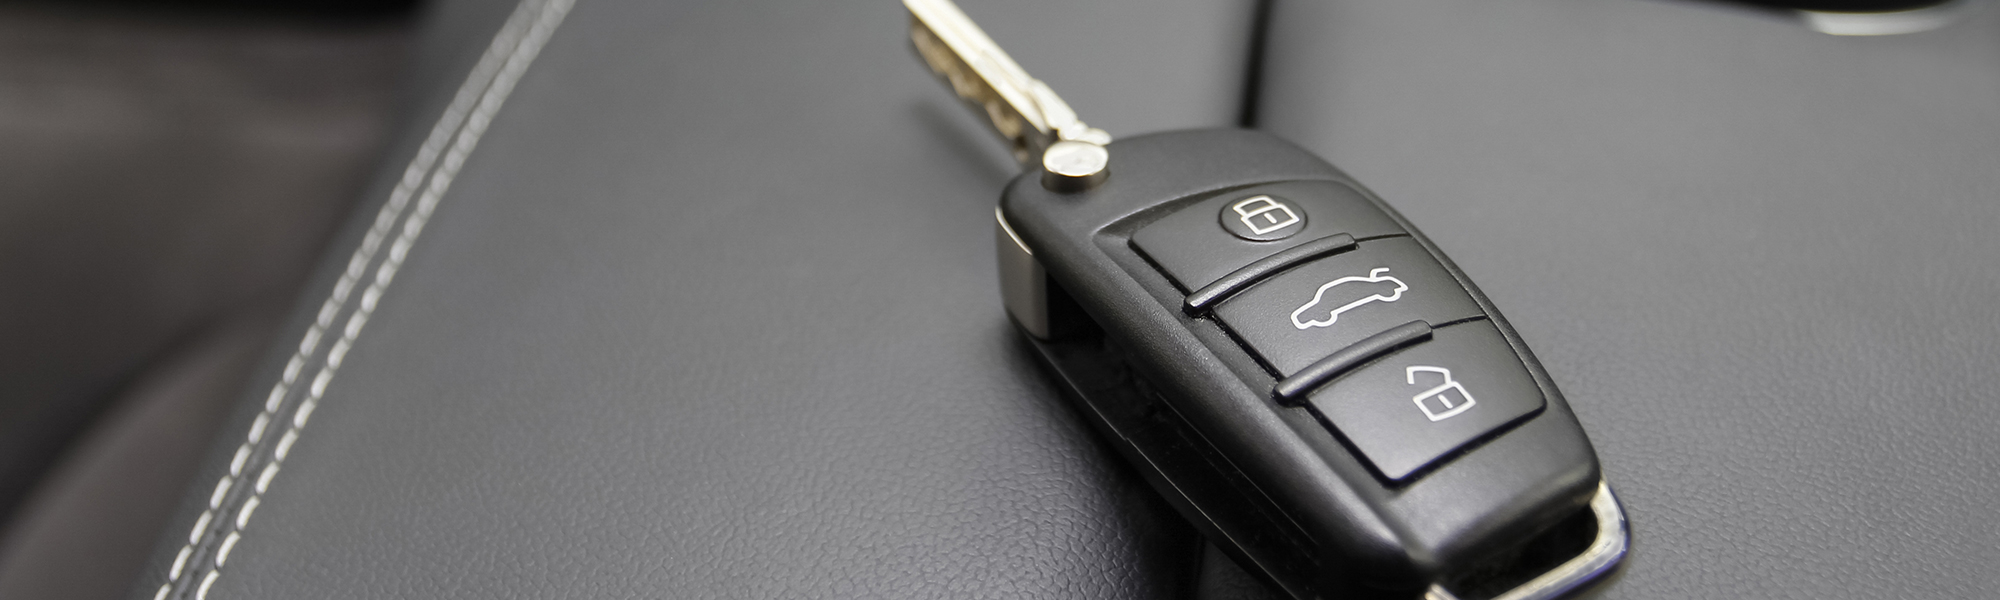 Can’t Stop Losing Your Car Keys? Check Out These 5 Tips